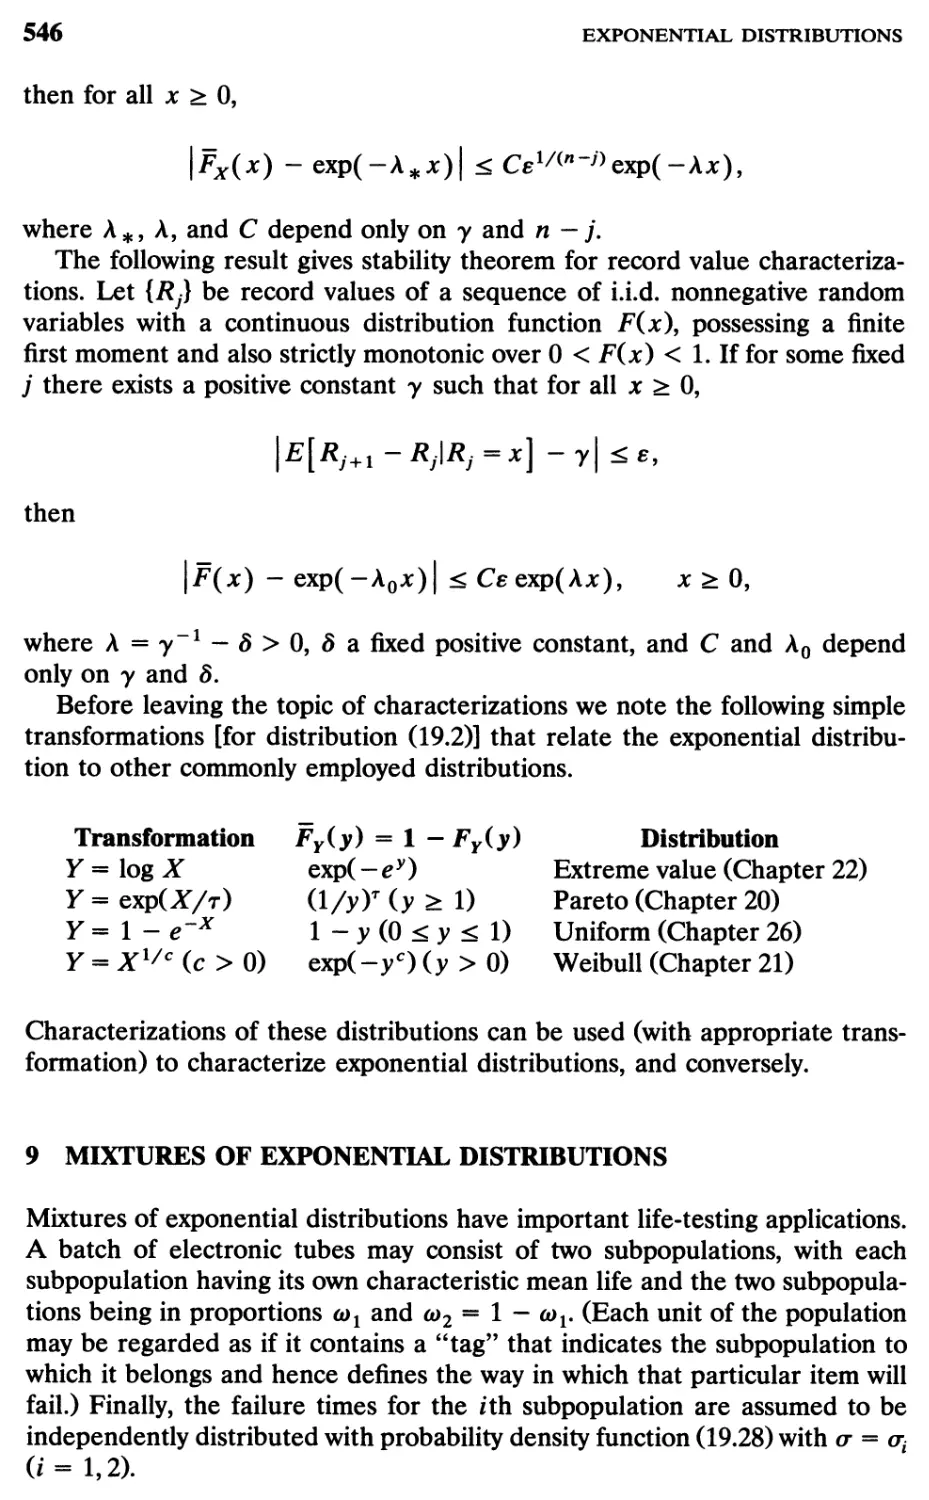 9 Mixtures of Exponential Distributions, 546